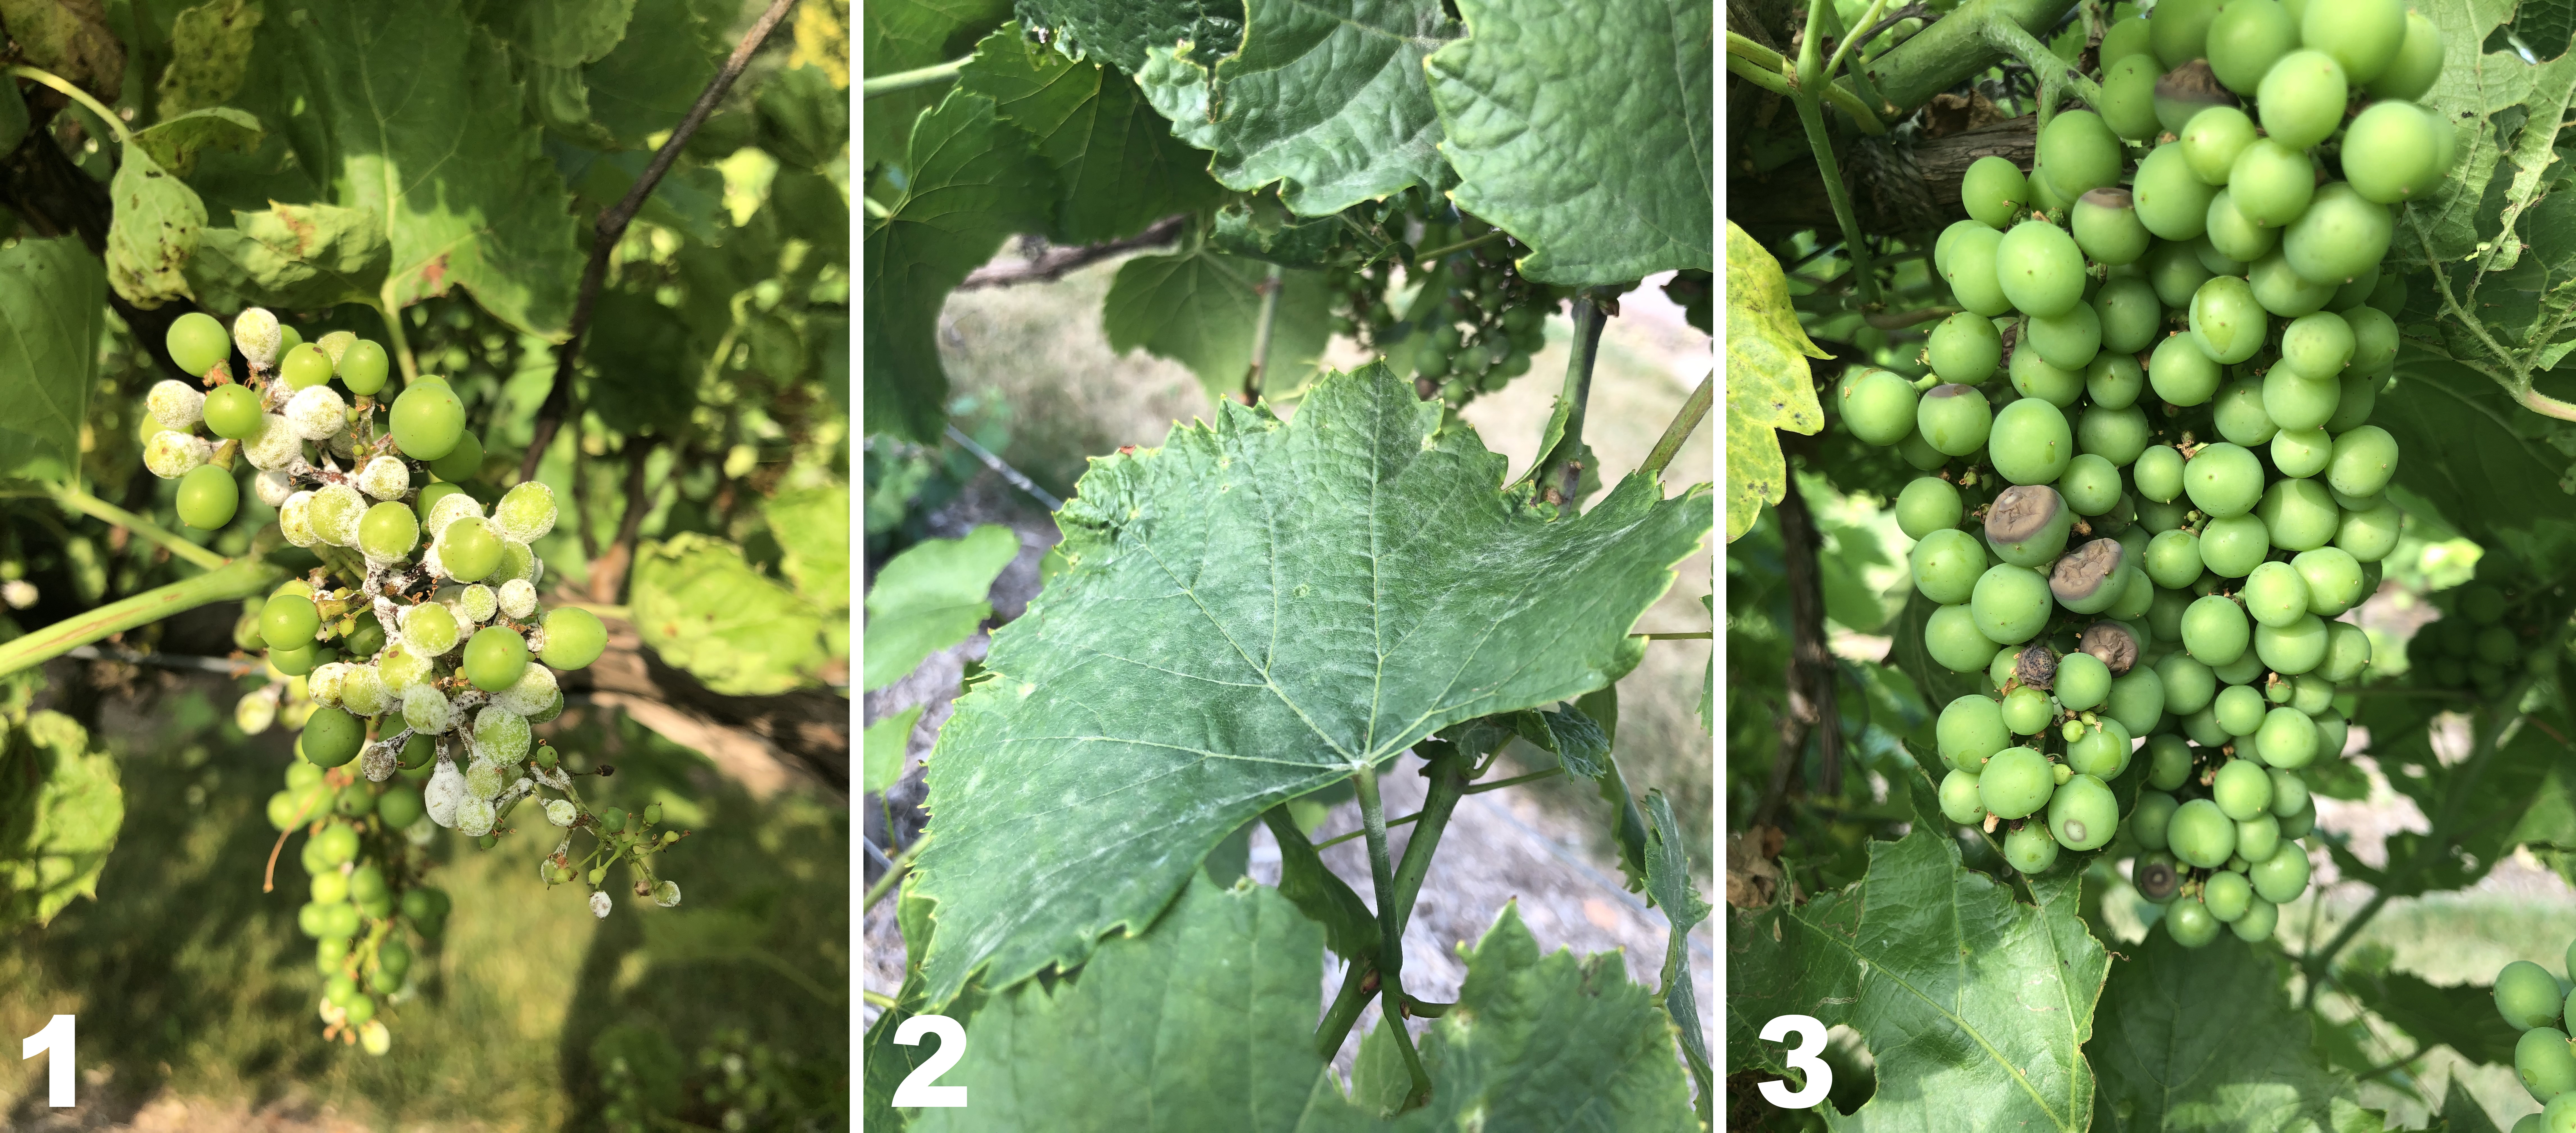 Downy mildew, powdery mildew and black rot on grapes